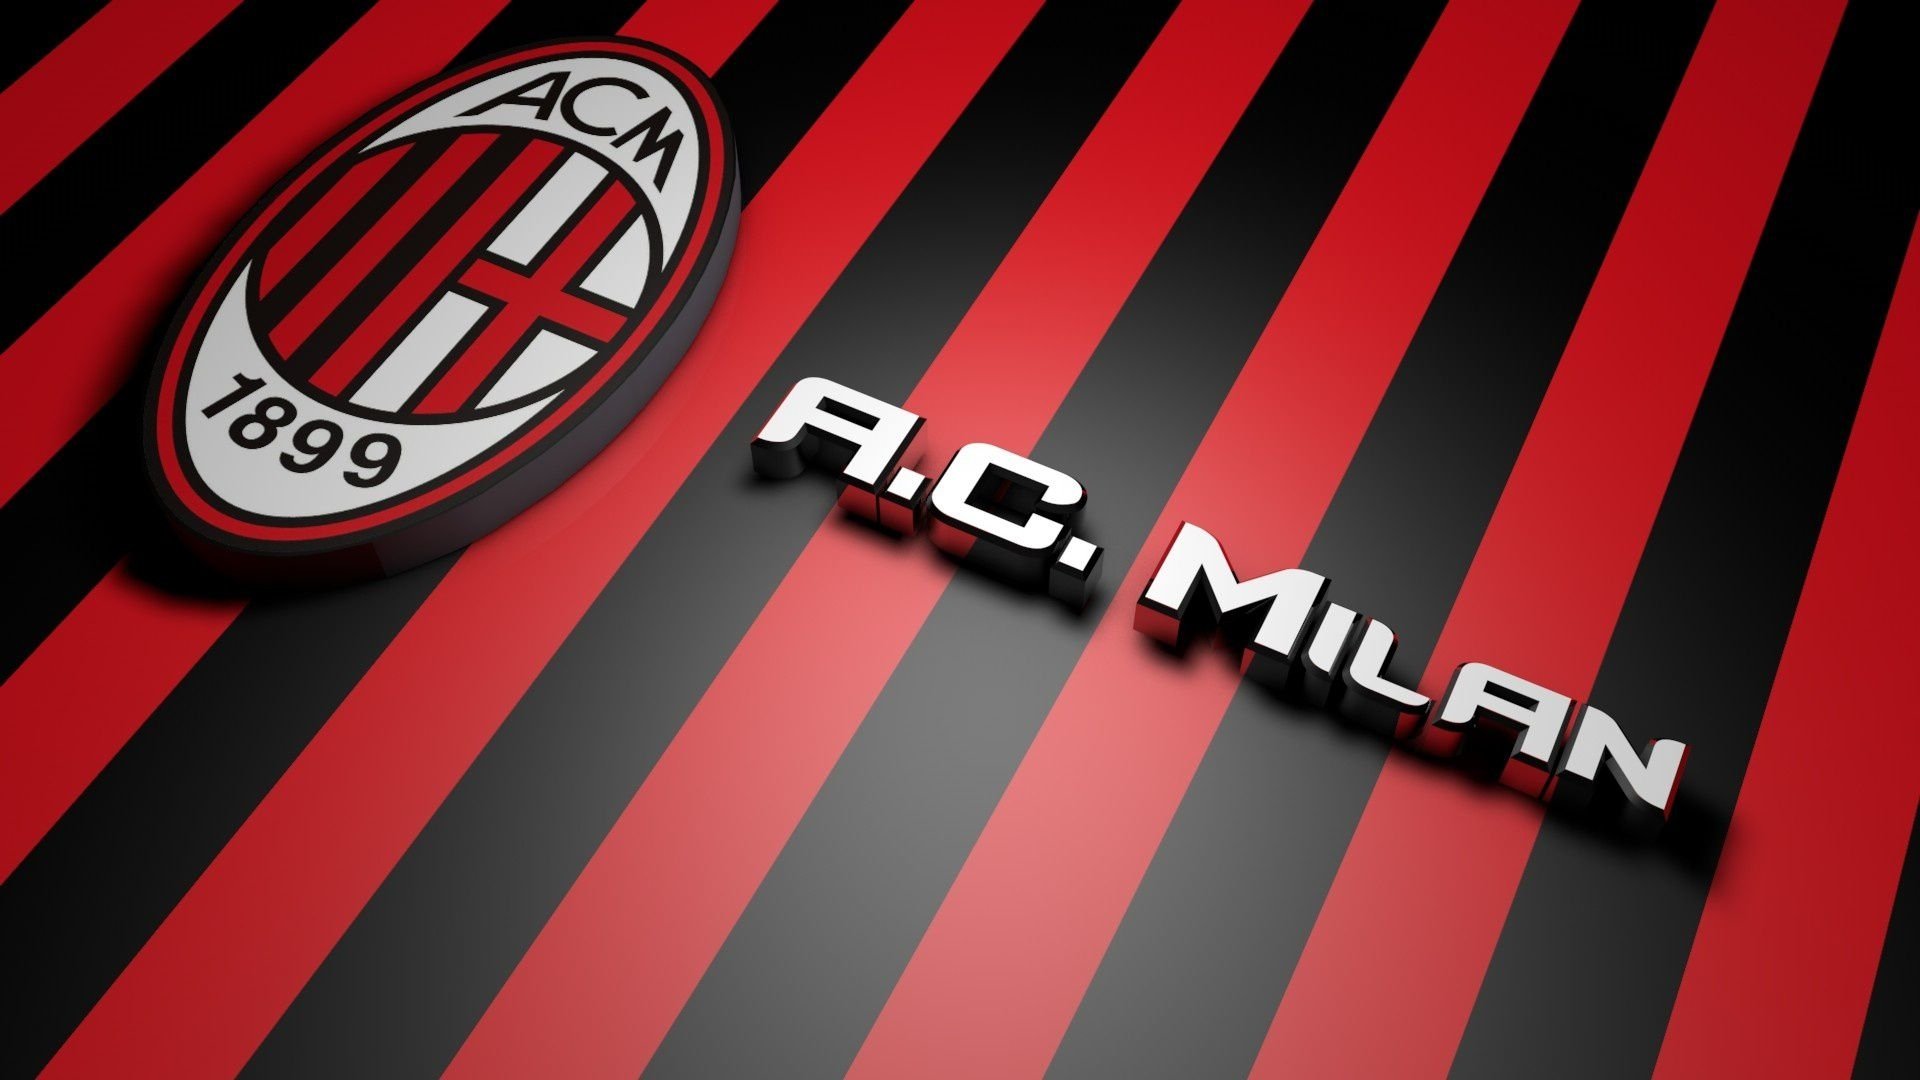 Ac milan hd papers and backgrounds